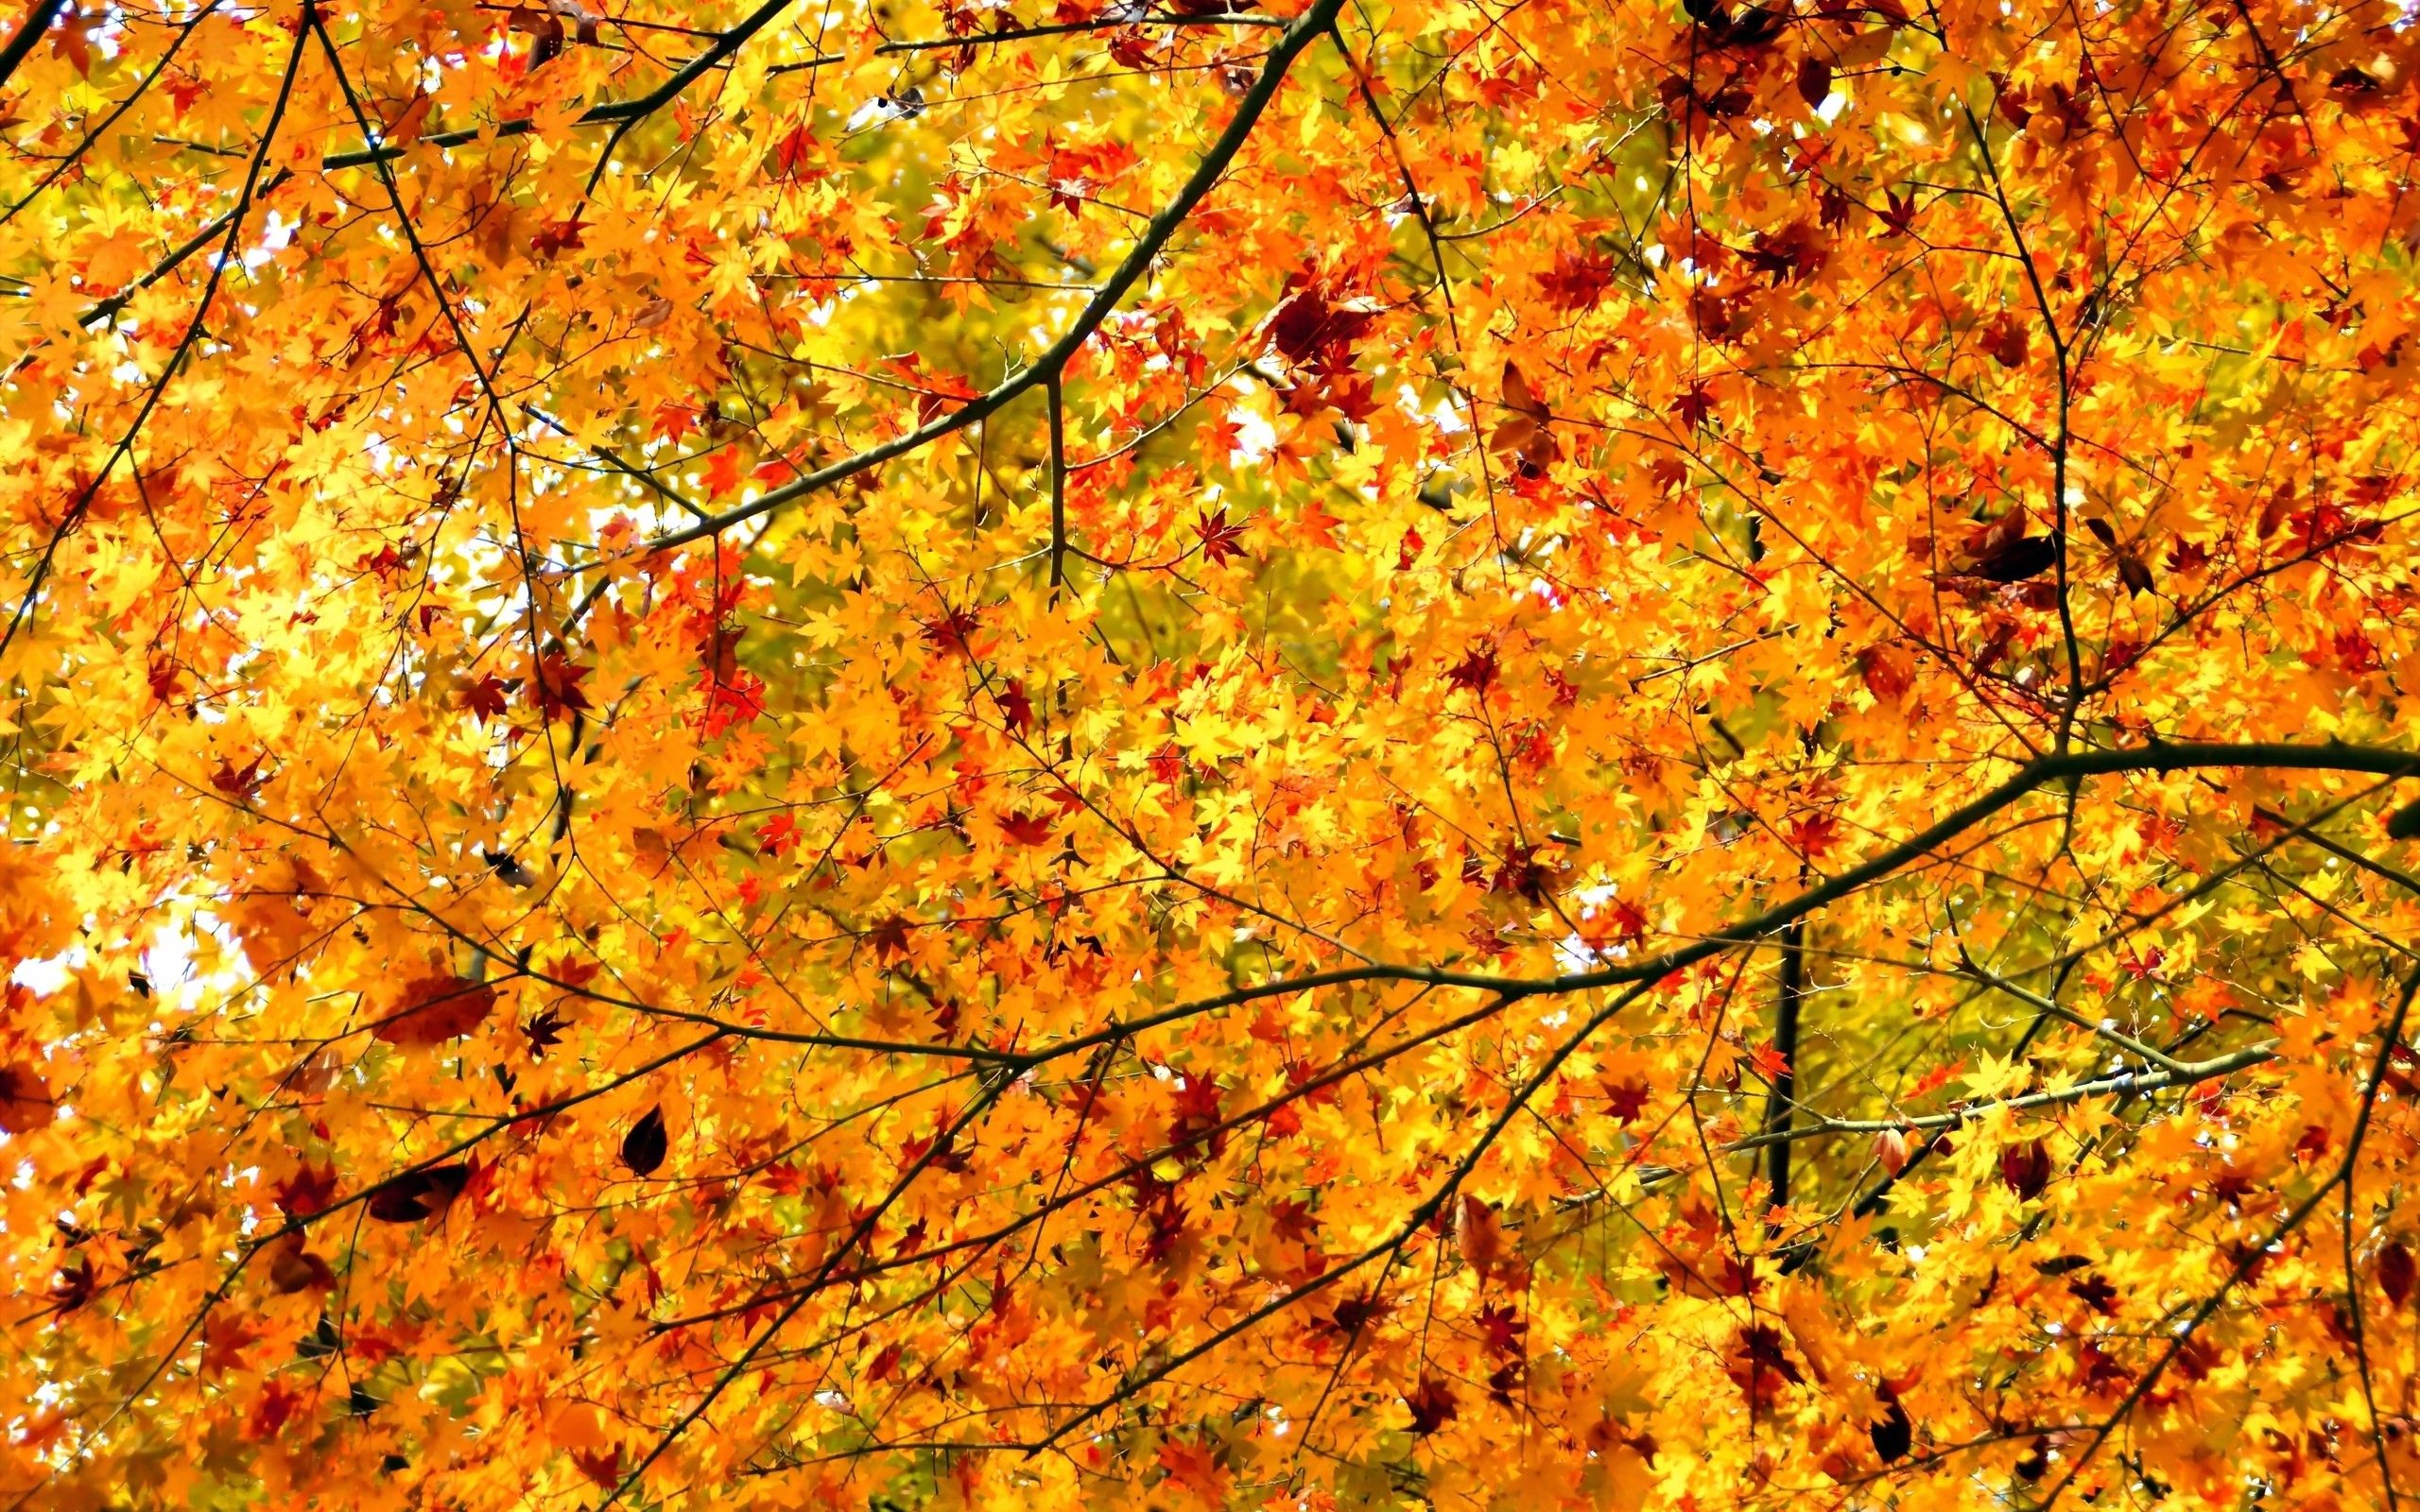 Daily Wallpaper: Autumn Maple Trees. I Like To Waste My Time